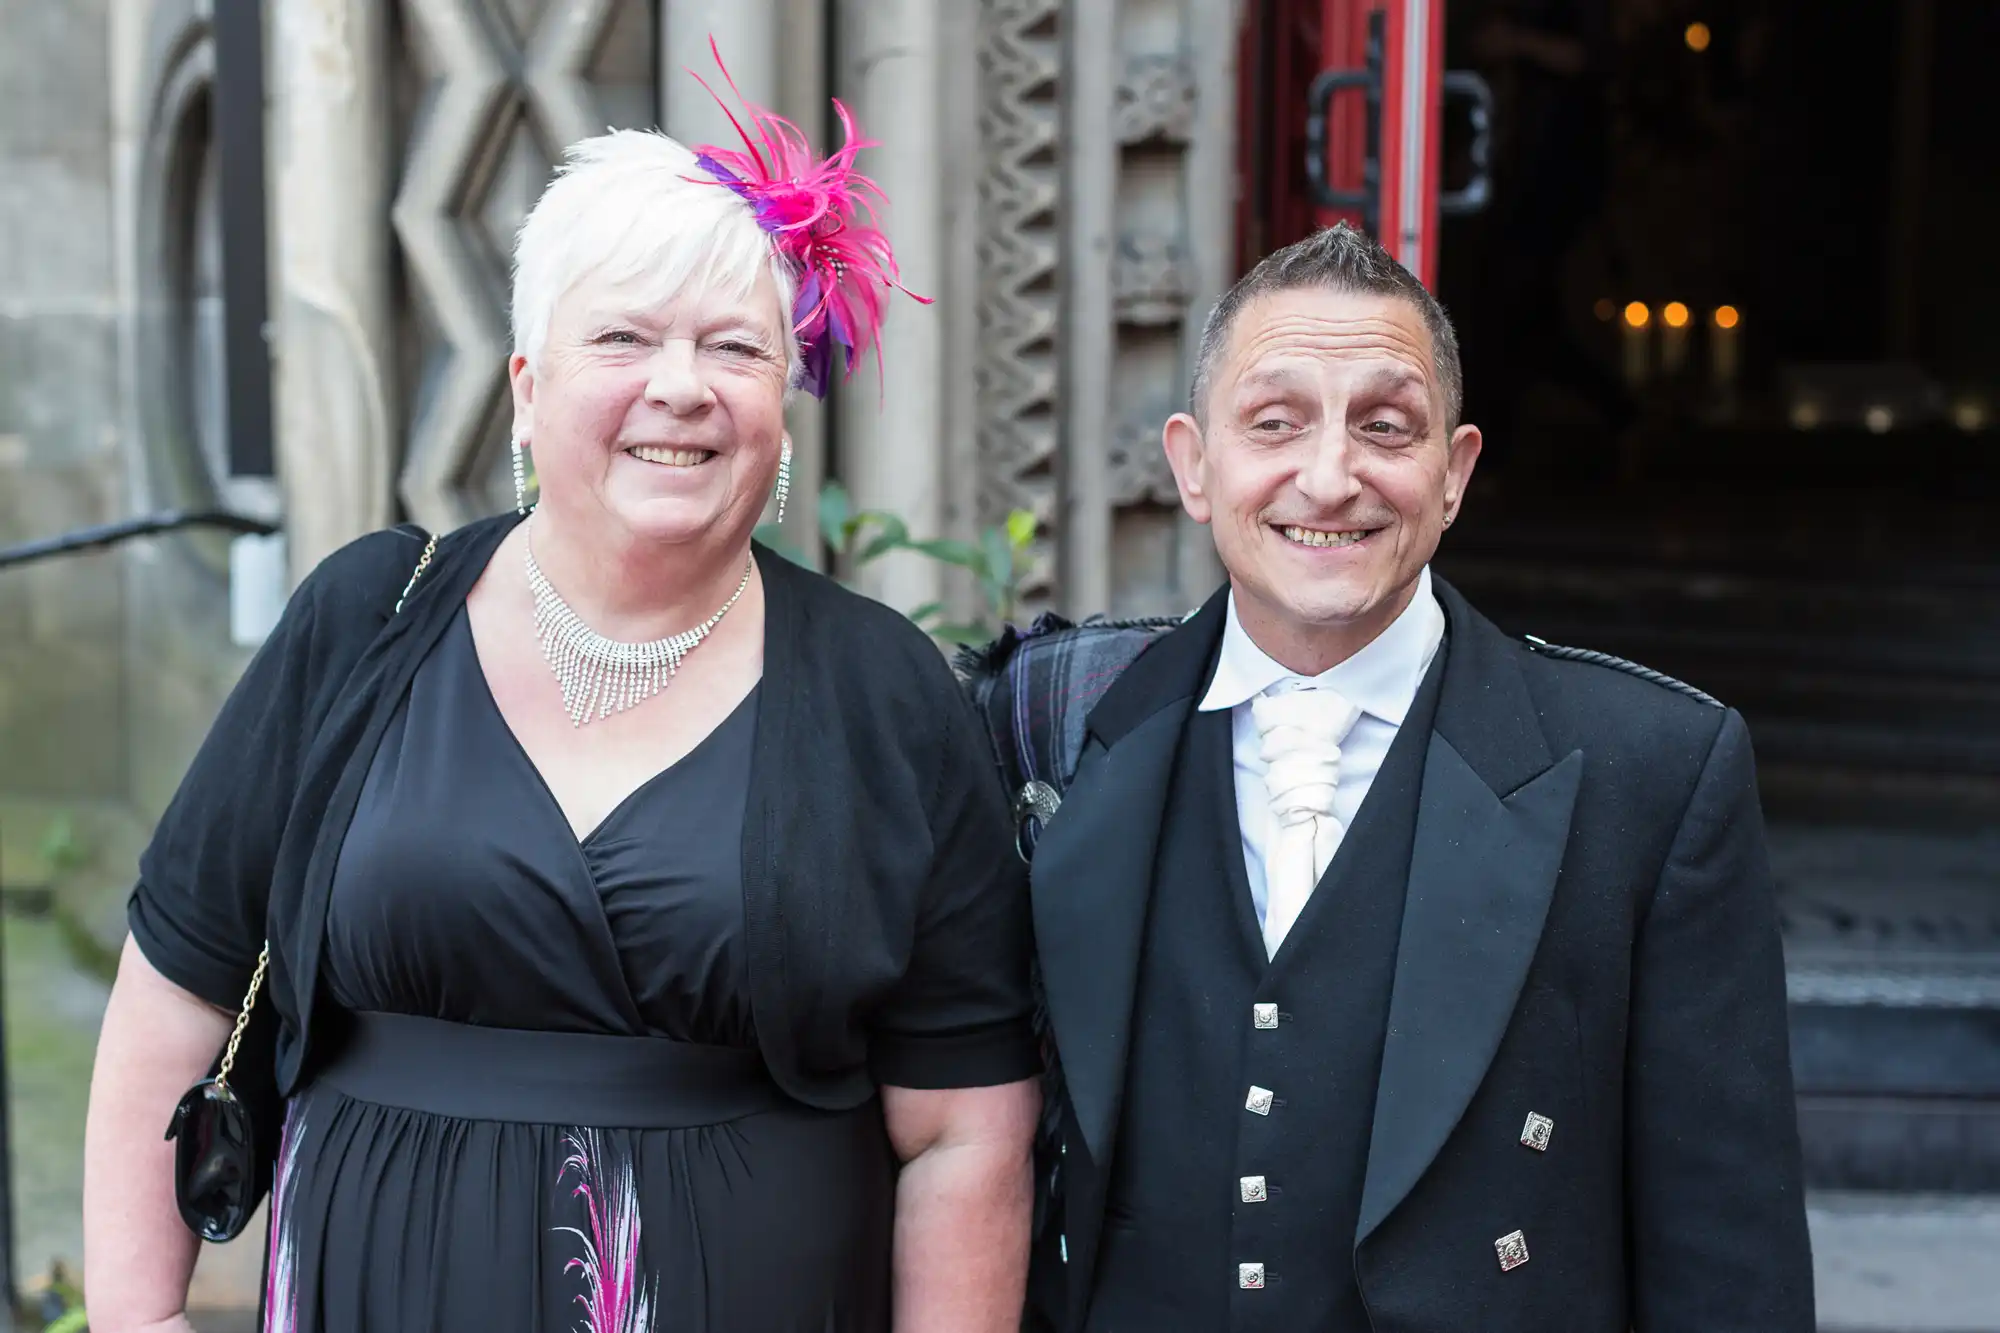 A smiling elderly couple dressed in formal attire standing outside a building, the woman wearing a black dress and pink fascinator, and the man in a black suit with medal decorations.